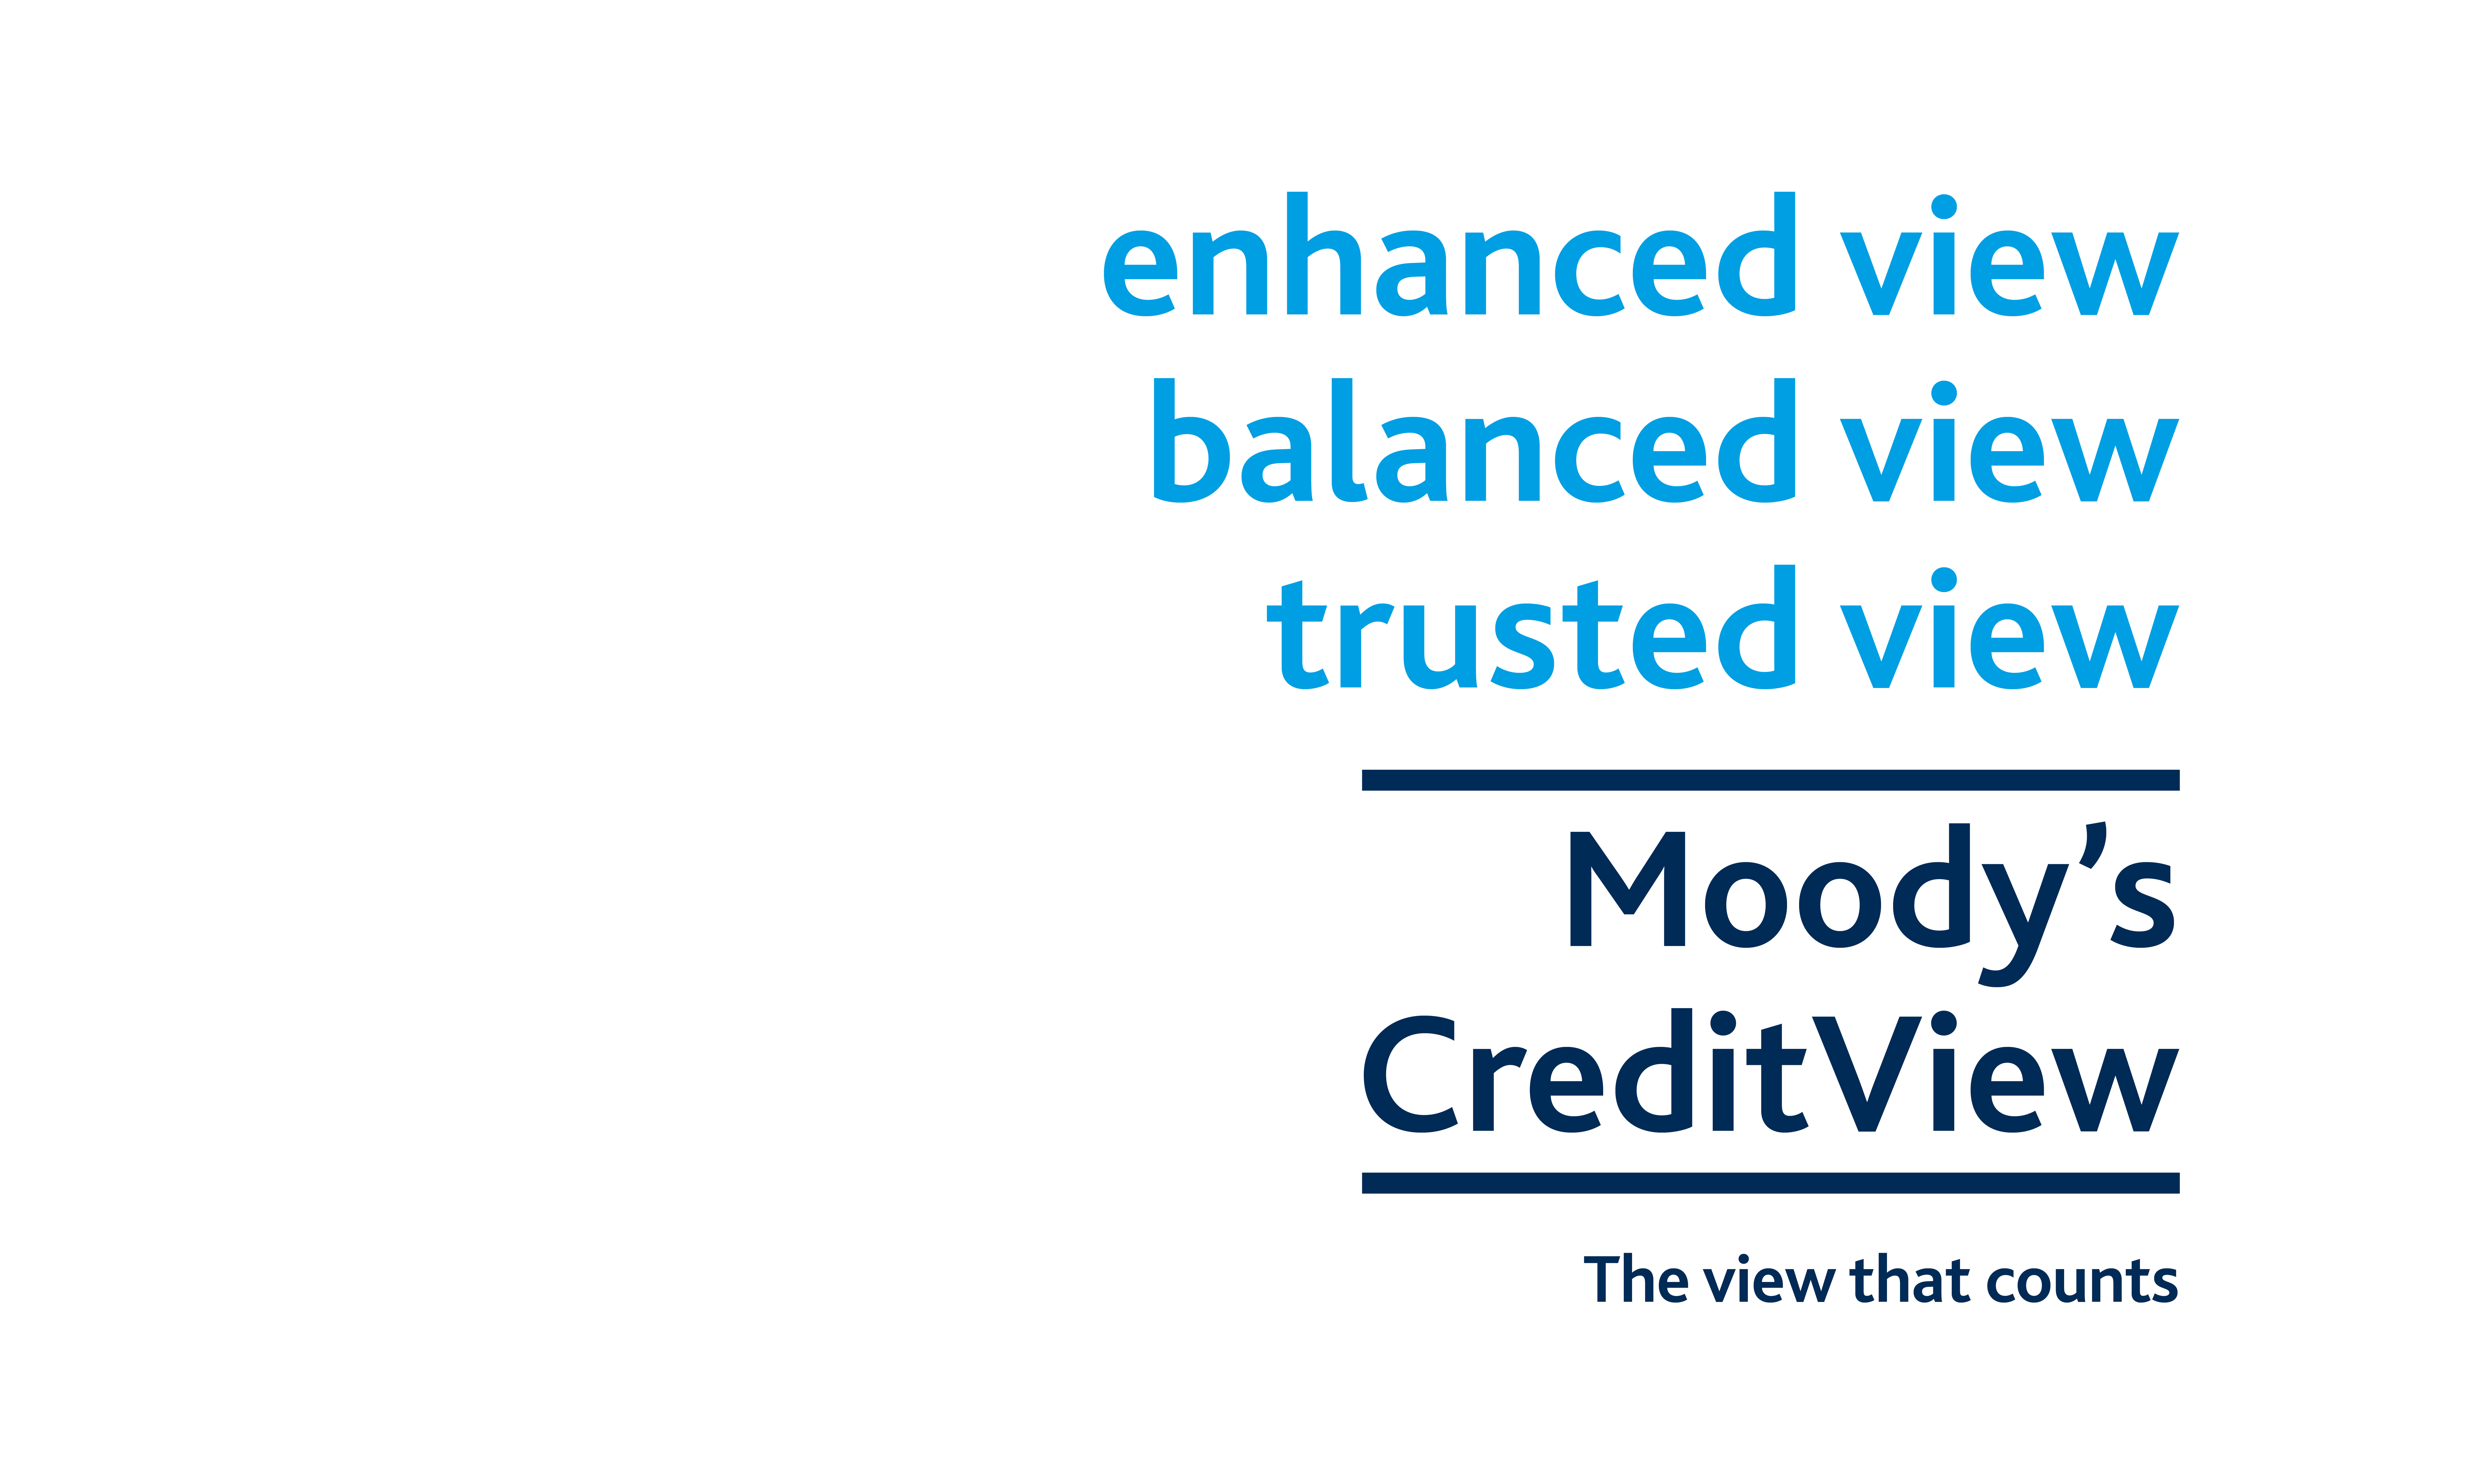 Branding by Neon - Moody's CreditView - The view that counts lead graphic for campaign designed by Dana Robertson